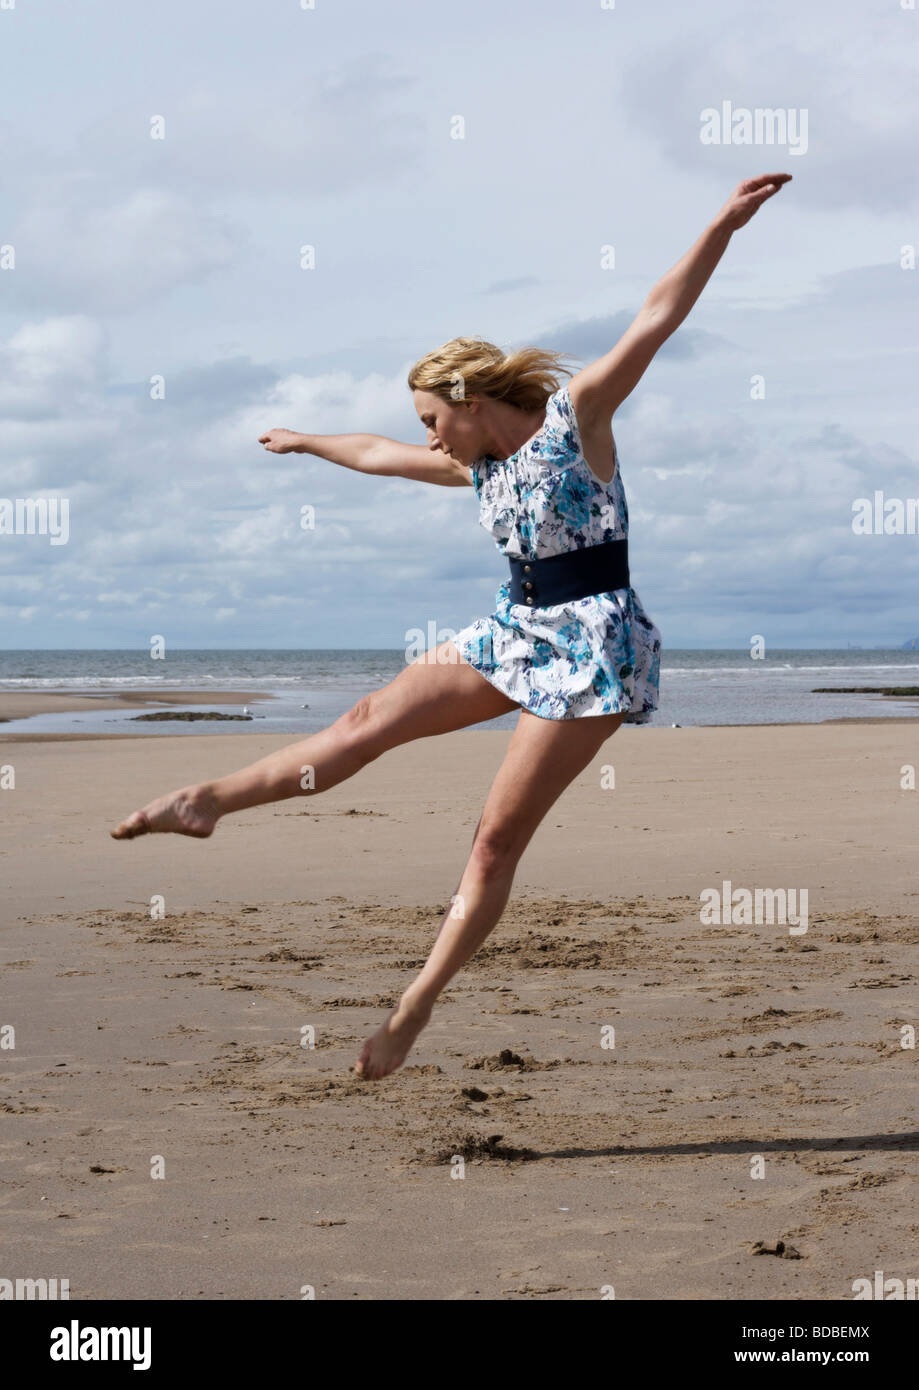 Woman dancing on the beach wearing an old-fashioned floral dress Stock Photo